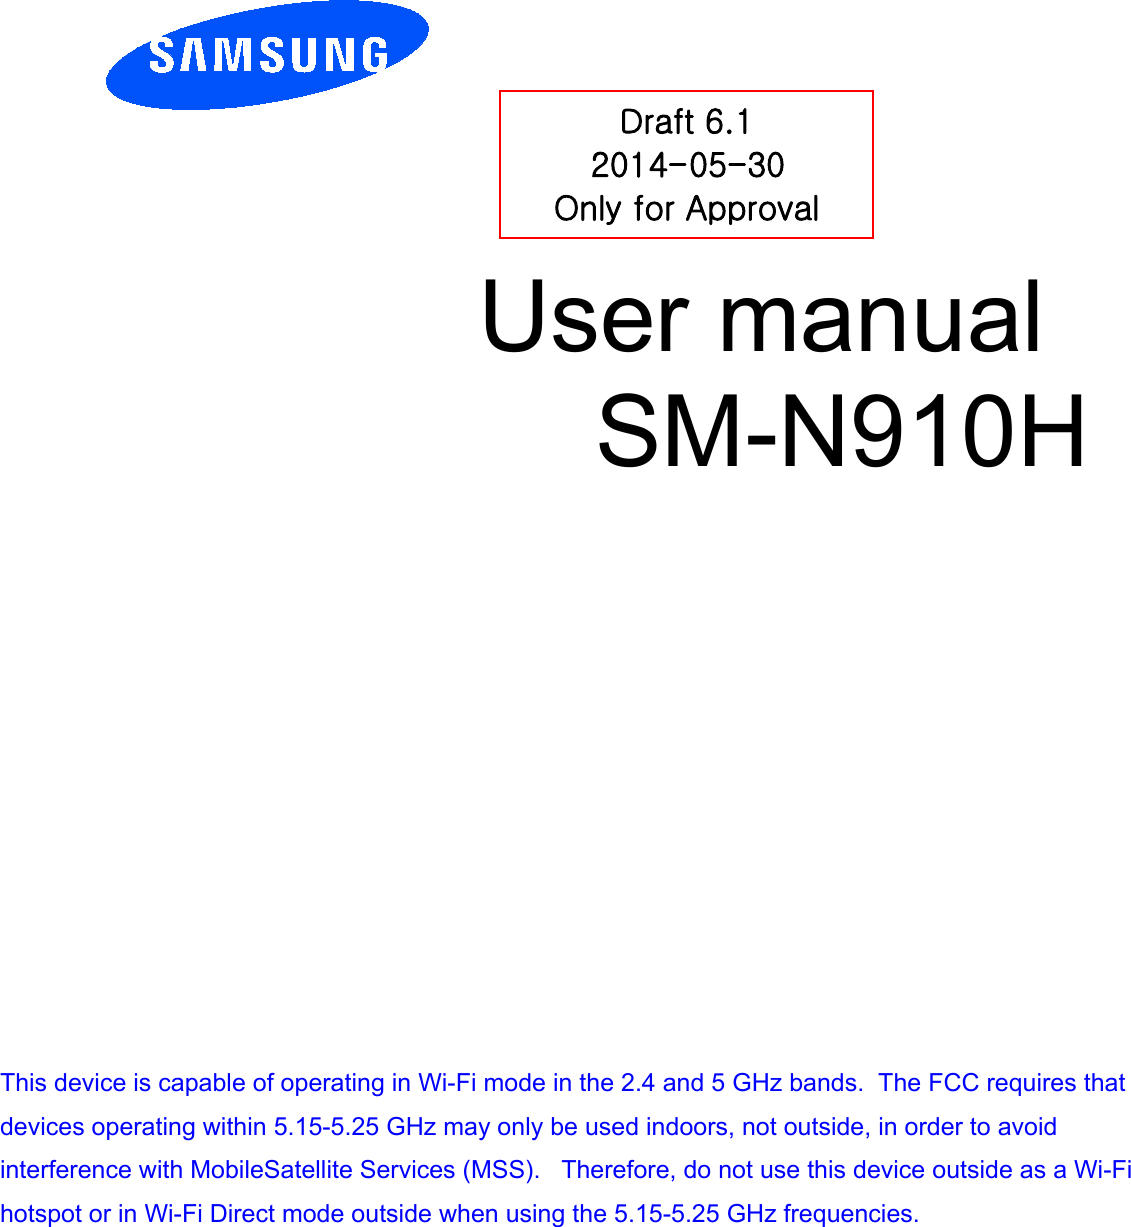          User manual  SM-N910H         Draft 6.1 2014-05-30 Only for Approval This device is capable of operating in Wi-Fi mode in the 2.4 and 5 GHz bands.  The FCC requires that devices operating within 5.15-5.25 GHz may only be used indoors, not outside, in order to avoid interference with MobileSatellite Services (MSS).   Therefore, do not use this device outside as a Wi-Fi hotspot or in Wi-Fi Direct mode outside when using the 5.15-5.25 GHz frequencies. 